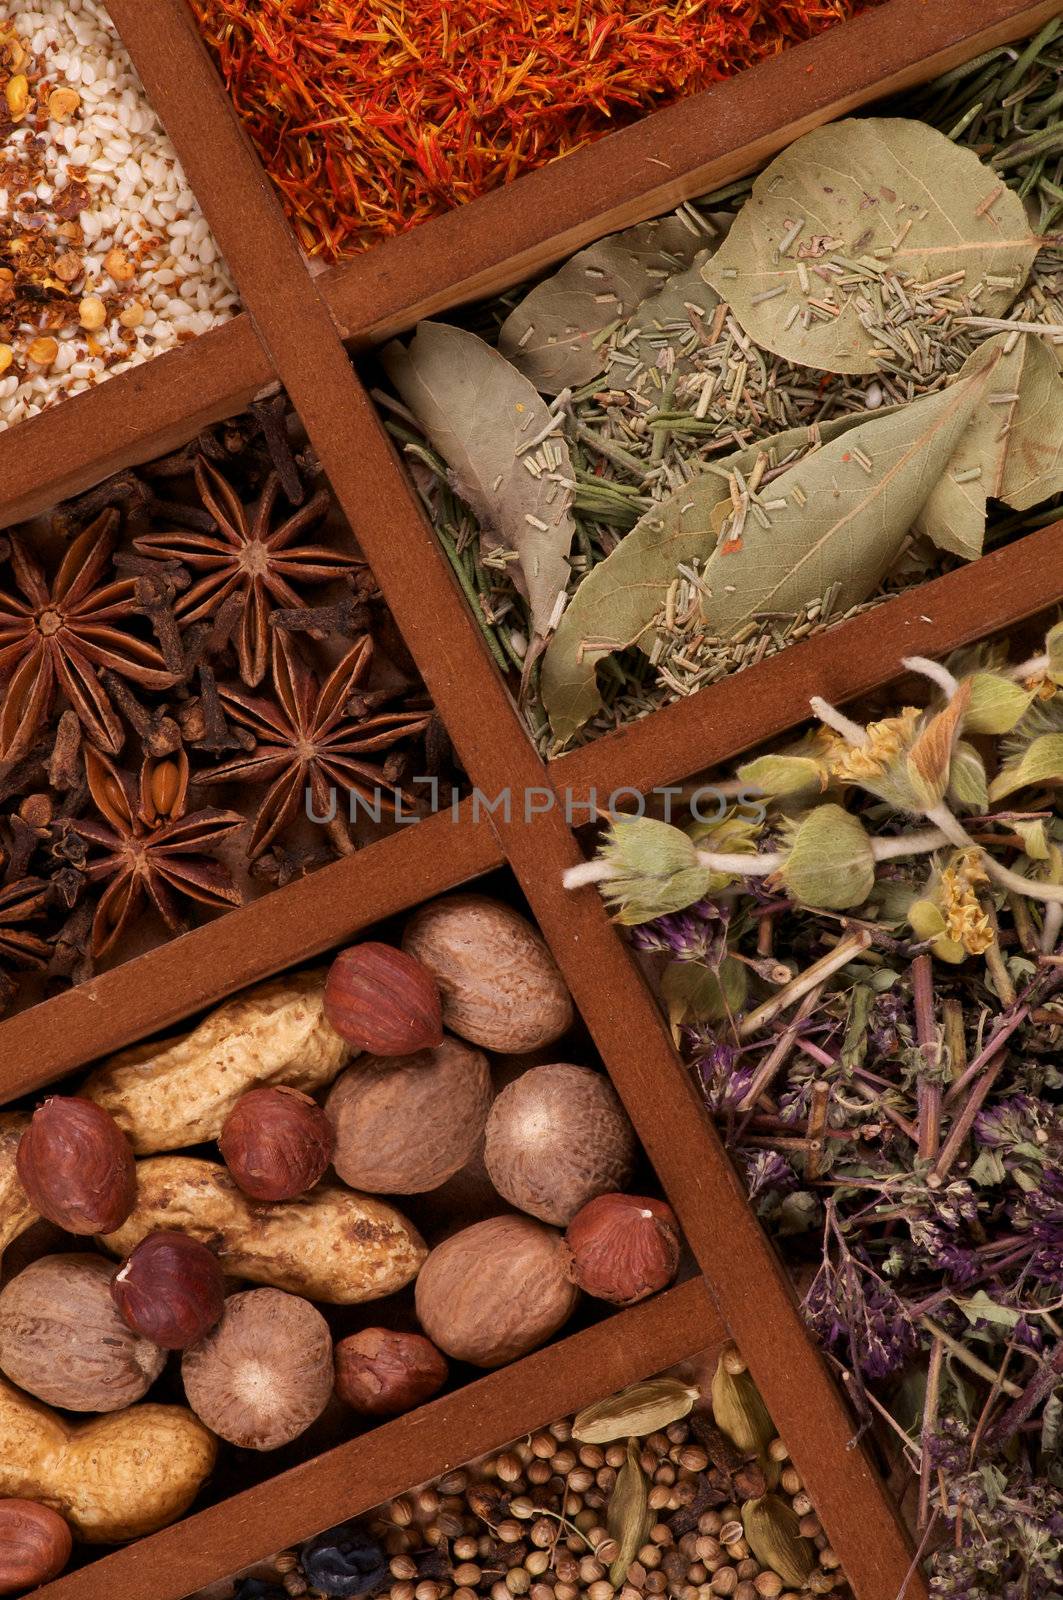 Spicy Spices in Wooden Box by zhekos